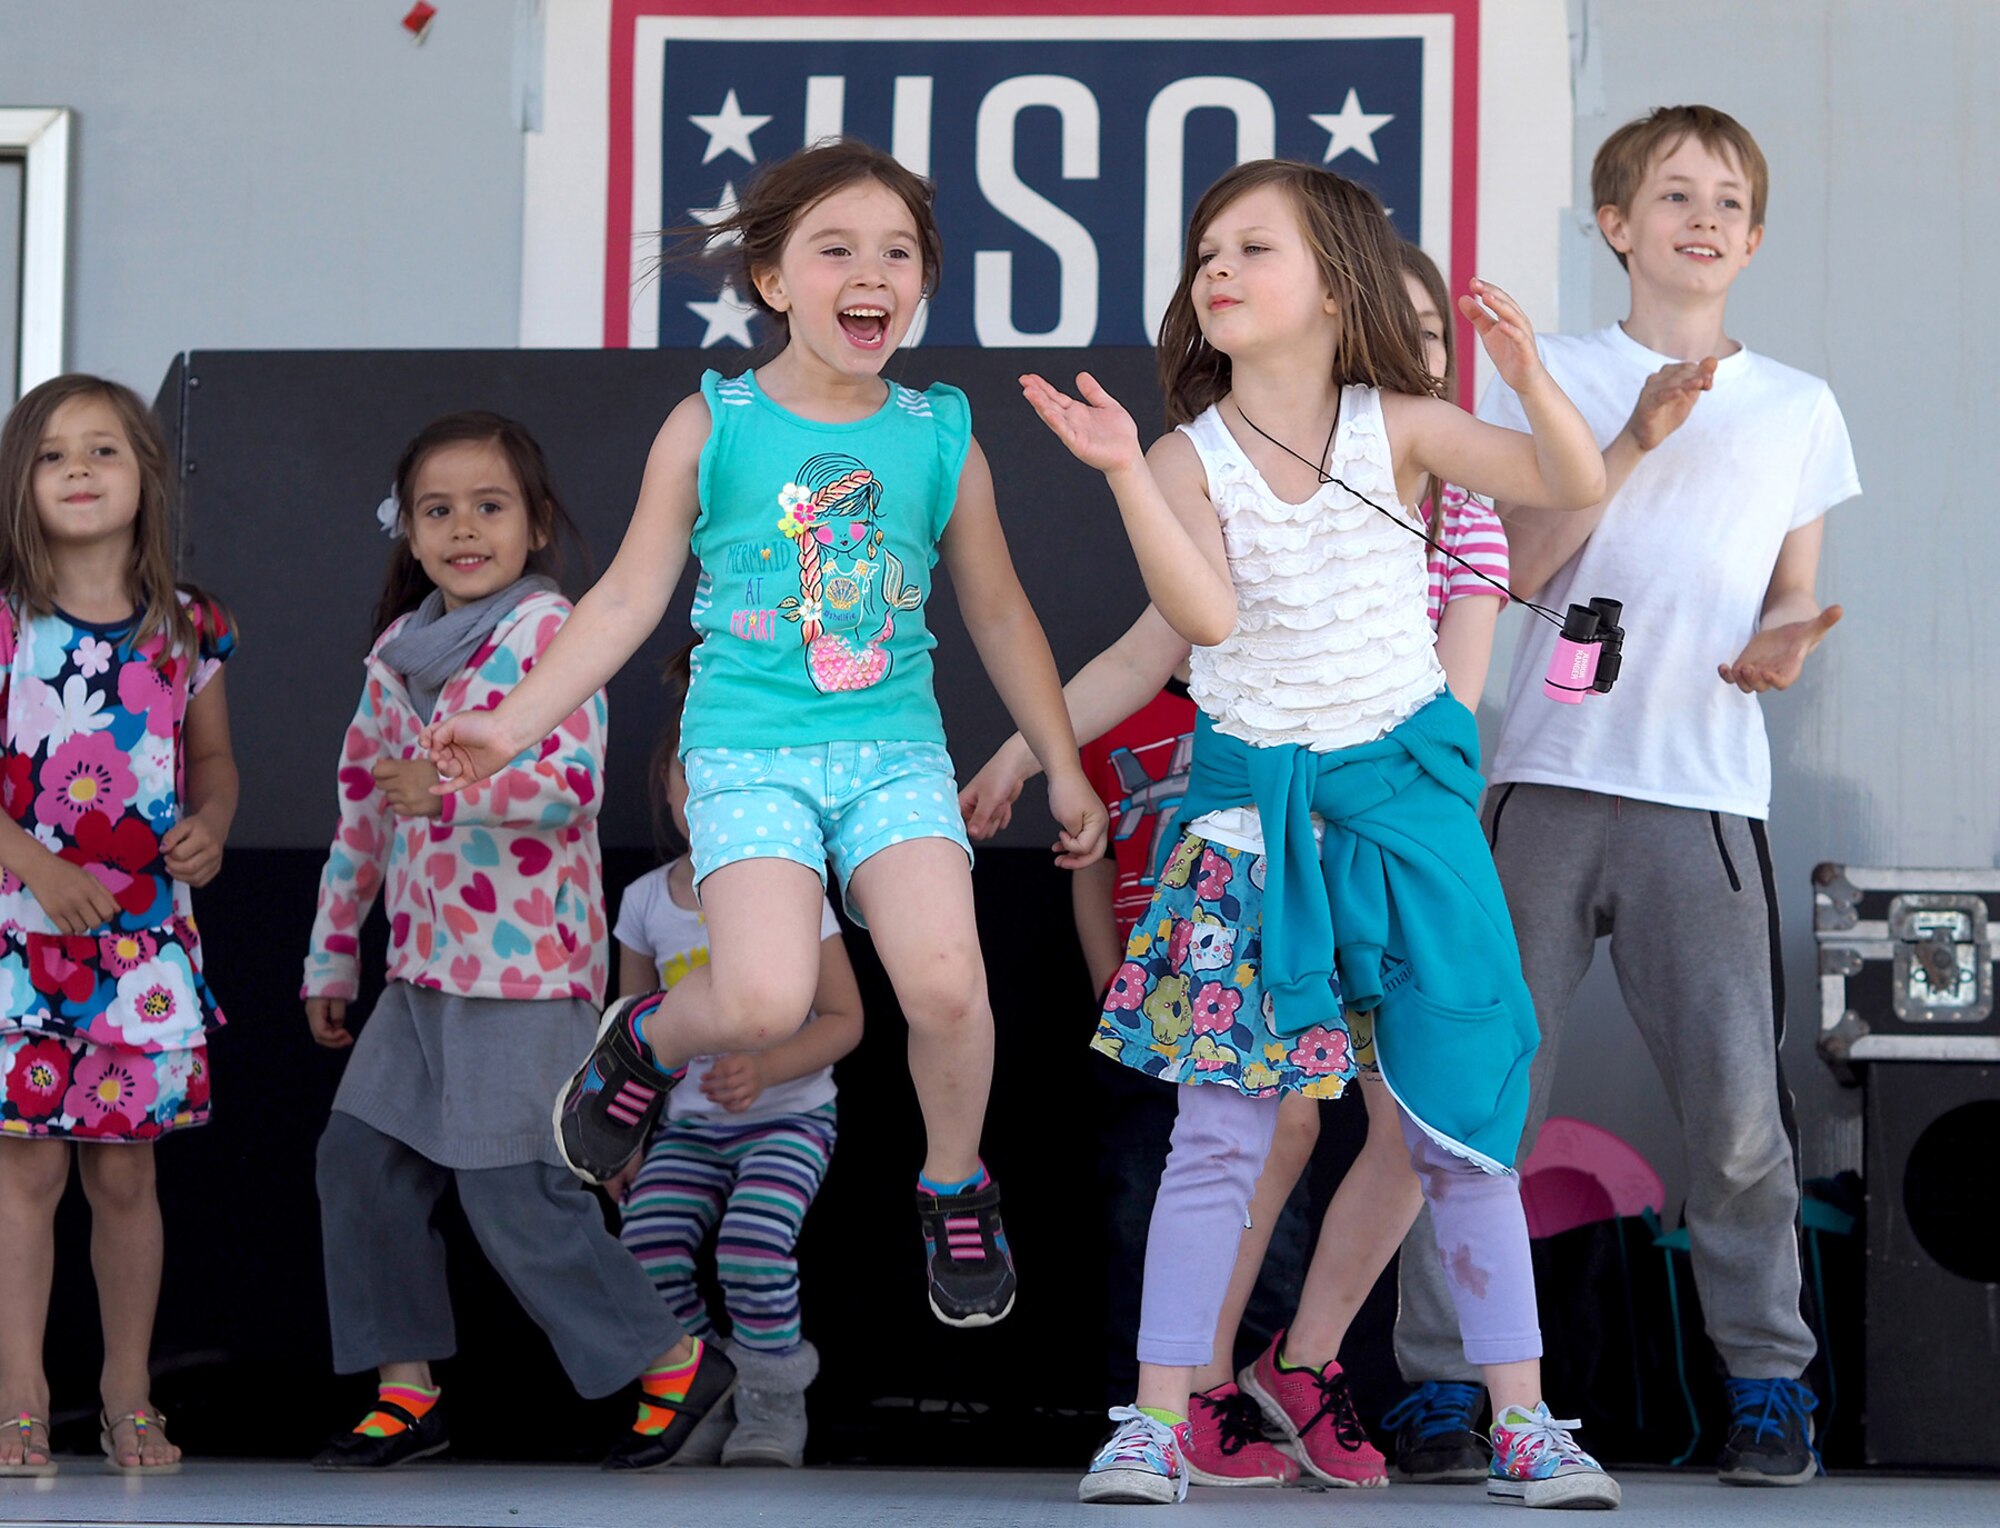 Children of military personnel stationed at Joint Base Elmendorf-Richardson, Alaska, dance on the United Service Organizations’ stage during the Military Appreciation Week picnic for service members, dependents, and Department of Defense civilians at the JBER Buckner Fitness Center fields June 16, 2017. Several organizations came together to provide a variety of family-fun activities such as competitive sporting events for the adults, face painting and bouncy houses for the children in addition to the Anchorage Chamber of Commerce-provided food and music during the annual event.